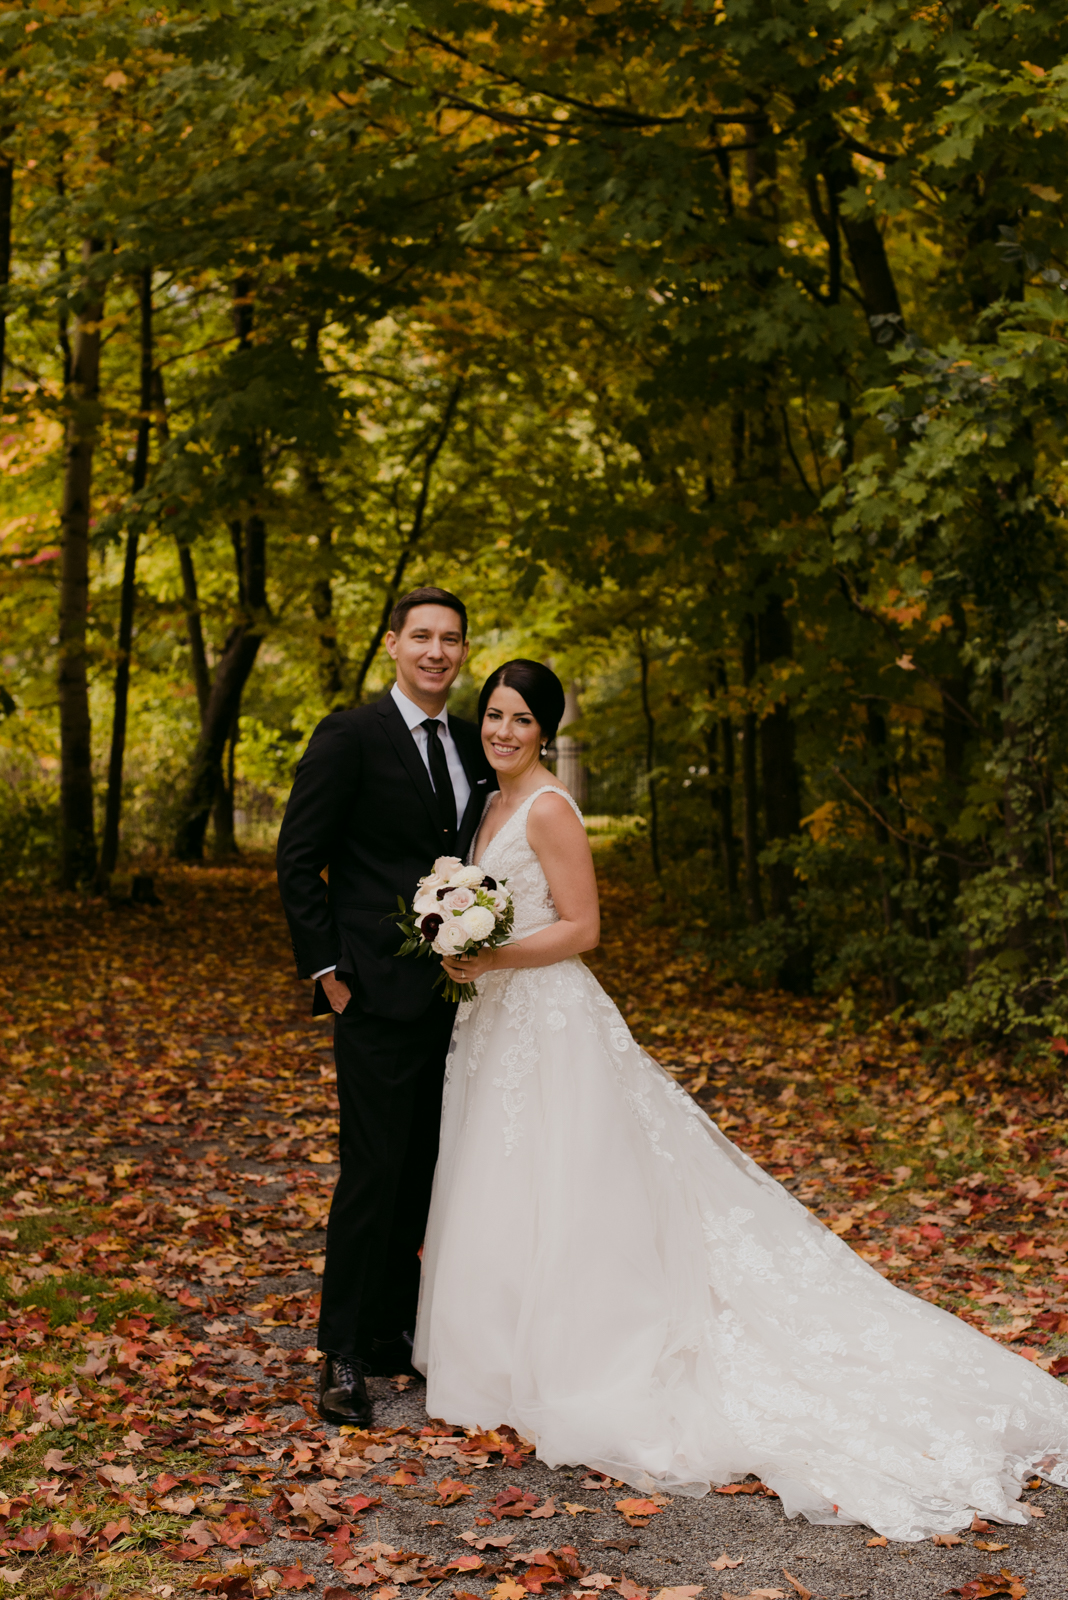 bride and groom smiling on fall path with leaves on the ground